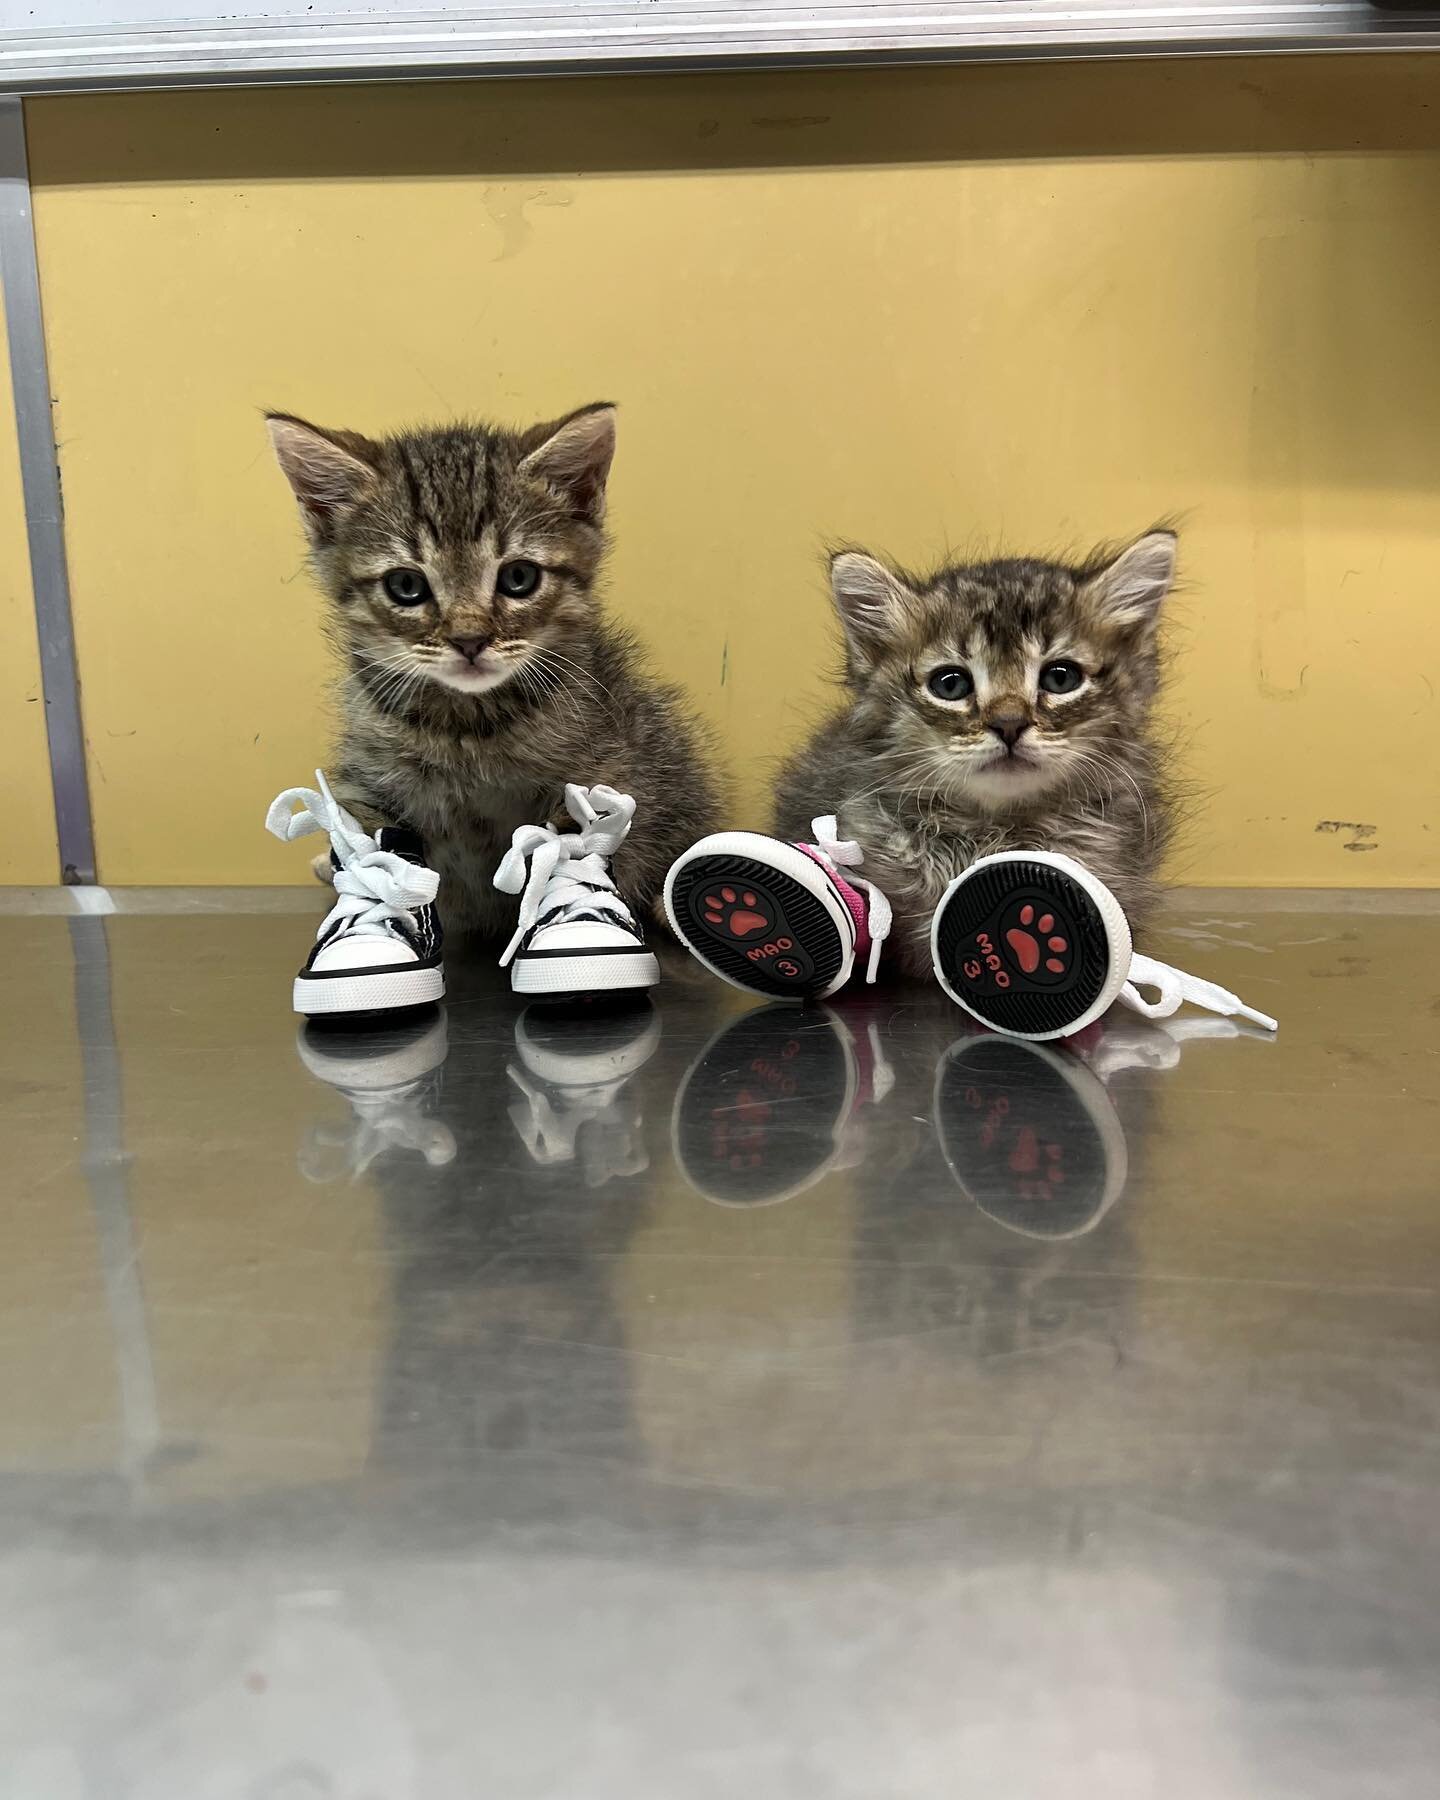 Meet Chicken &amp; Nugget! These two adorable kittens were found underneath a car by a true hero named Legend! 🤍🐈🐶🐾❤️ swipe to see our hero, Legend! 🐶🐾